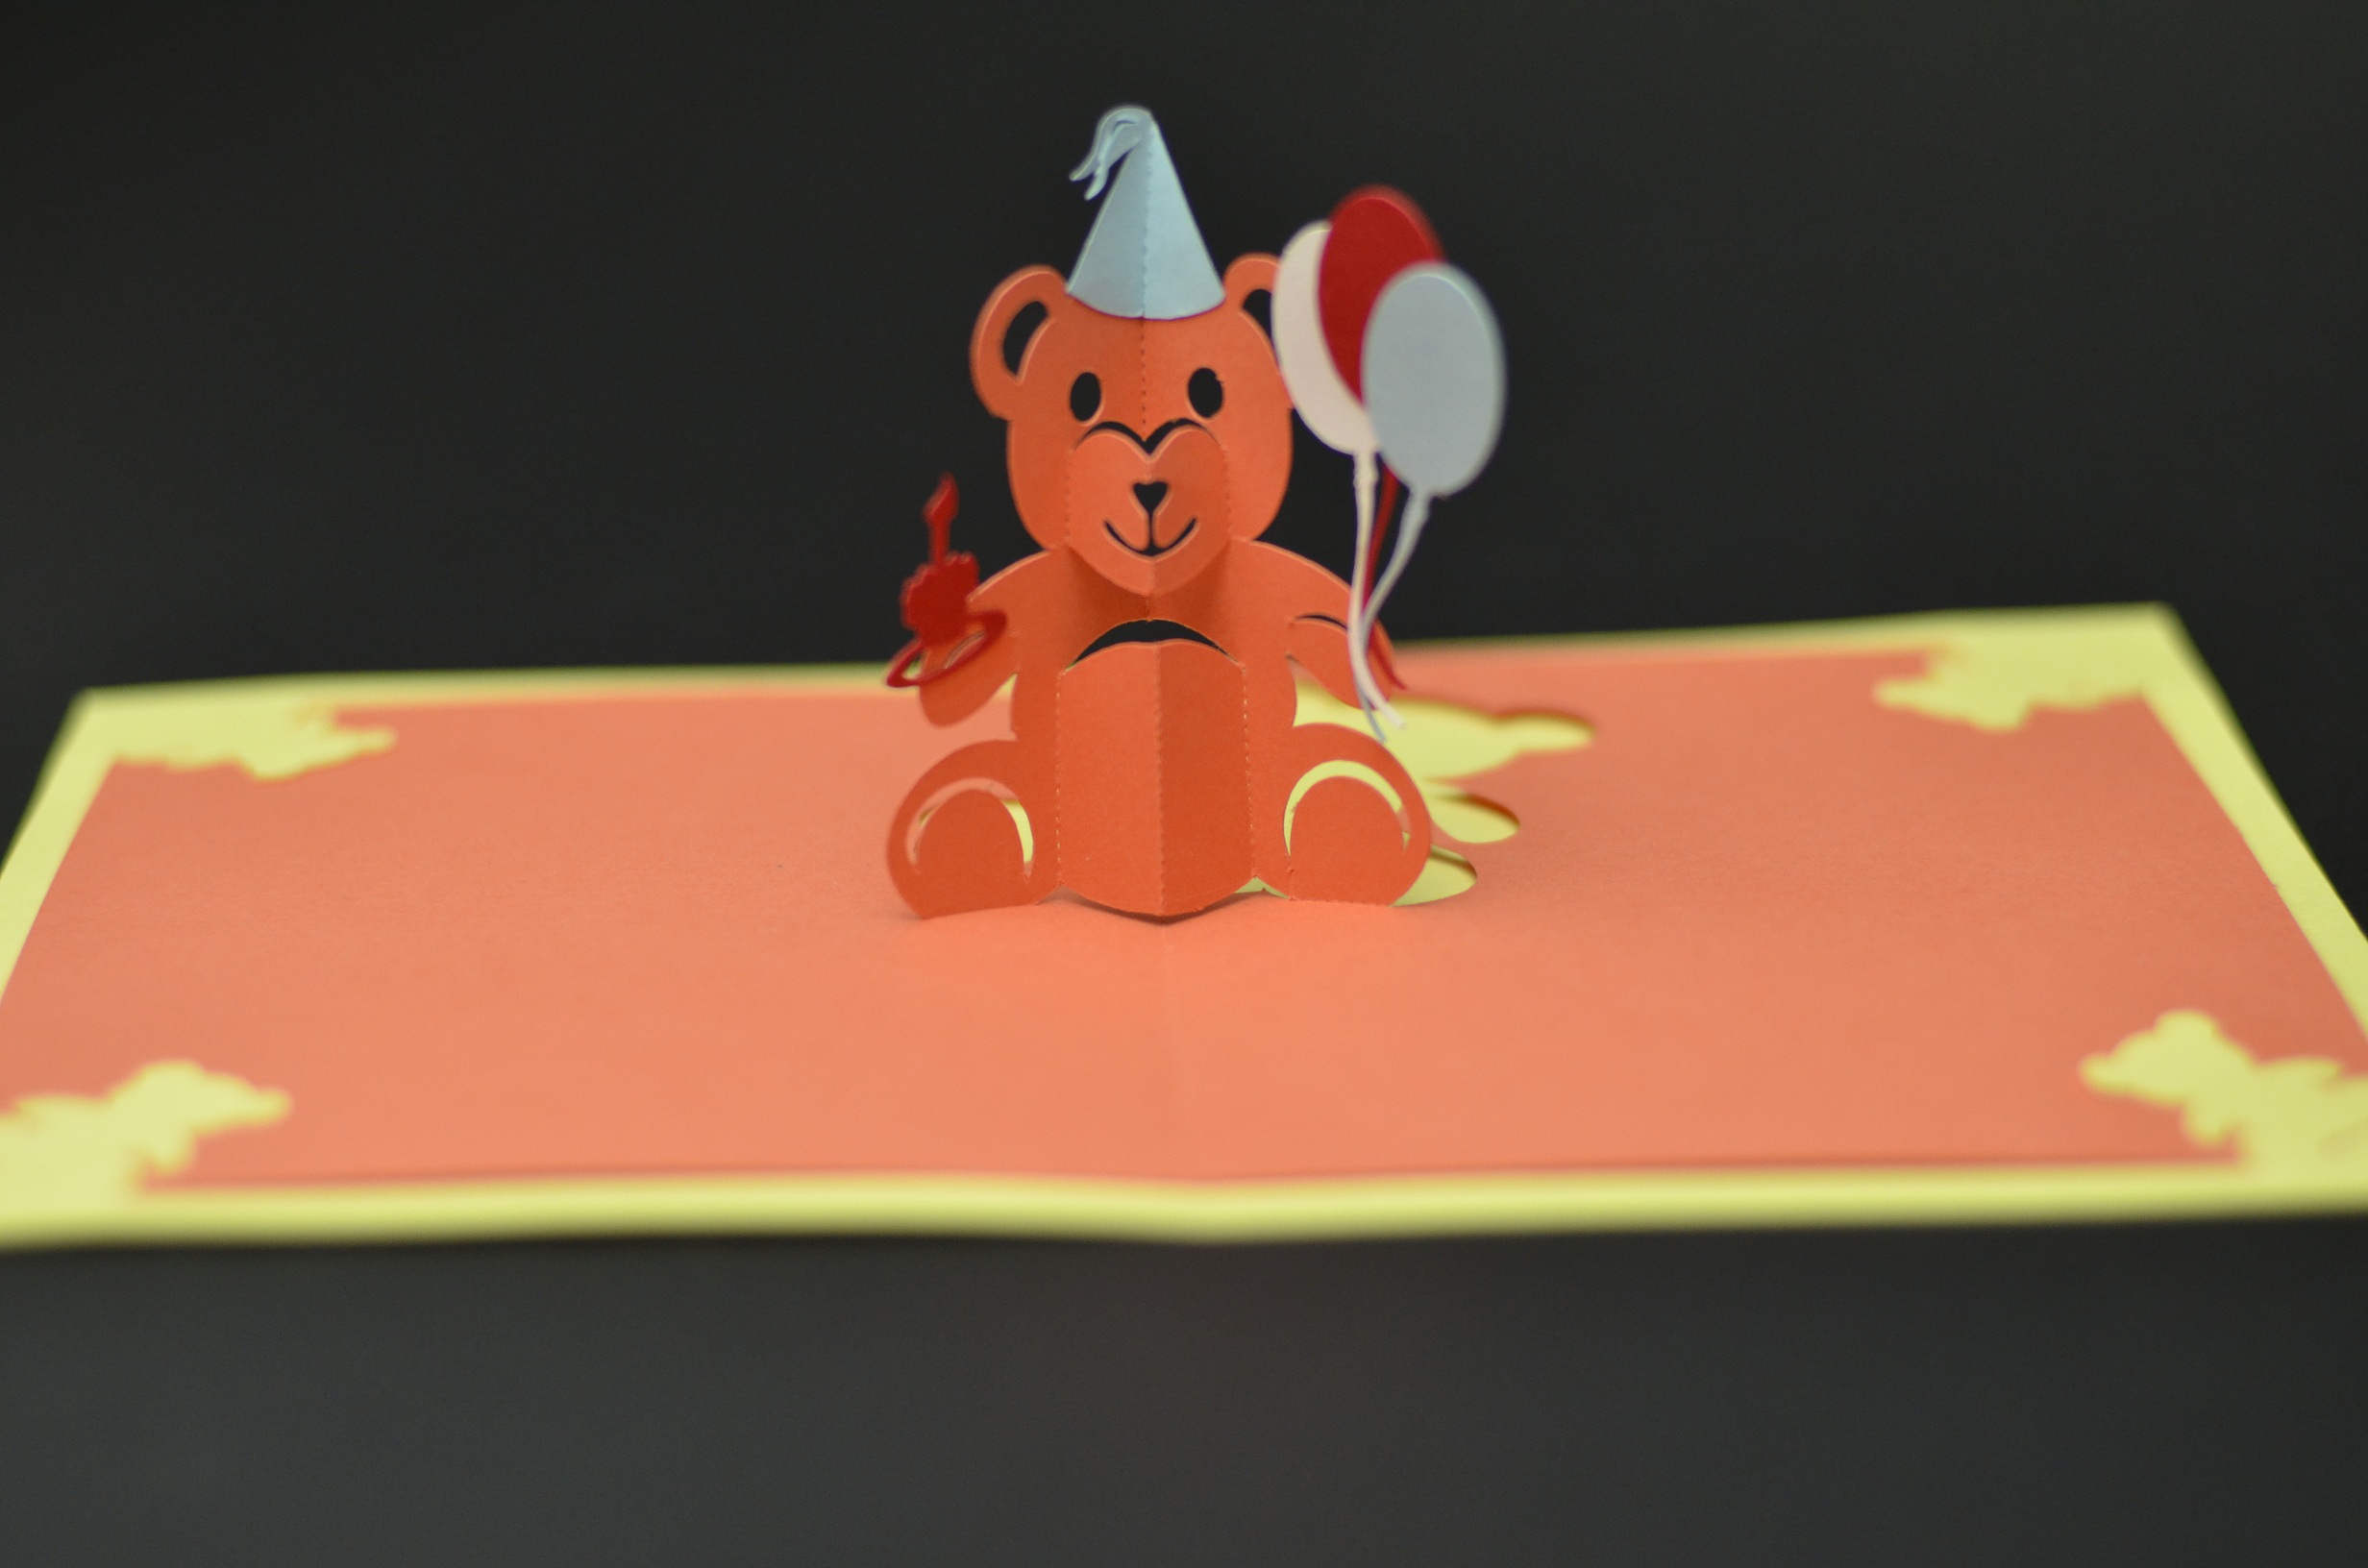 Download Teddy Bear Pop Up Card Template - Creative Pop Up Cards